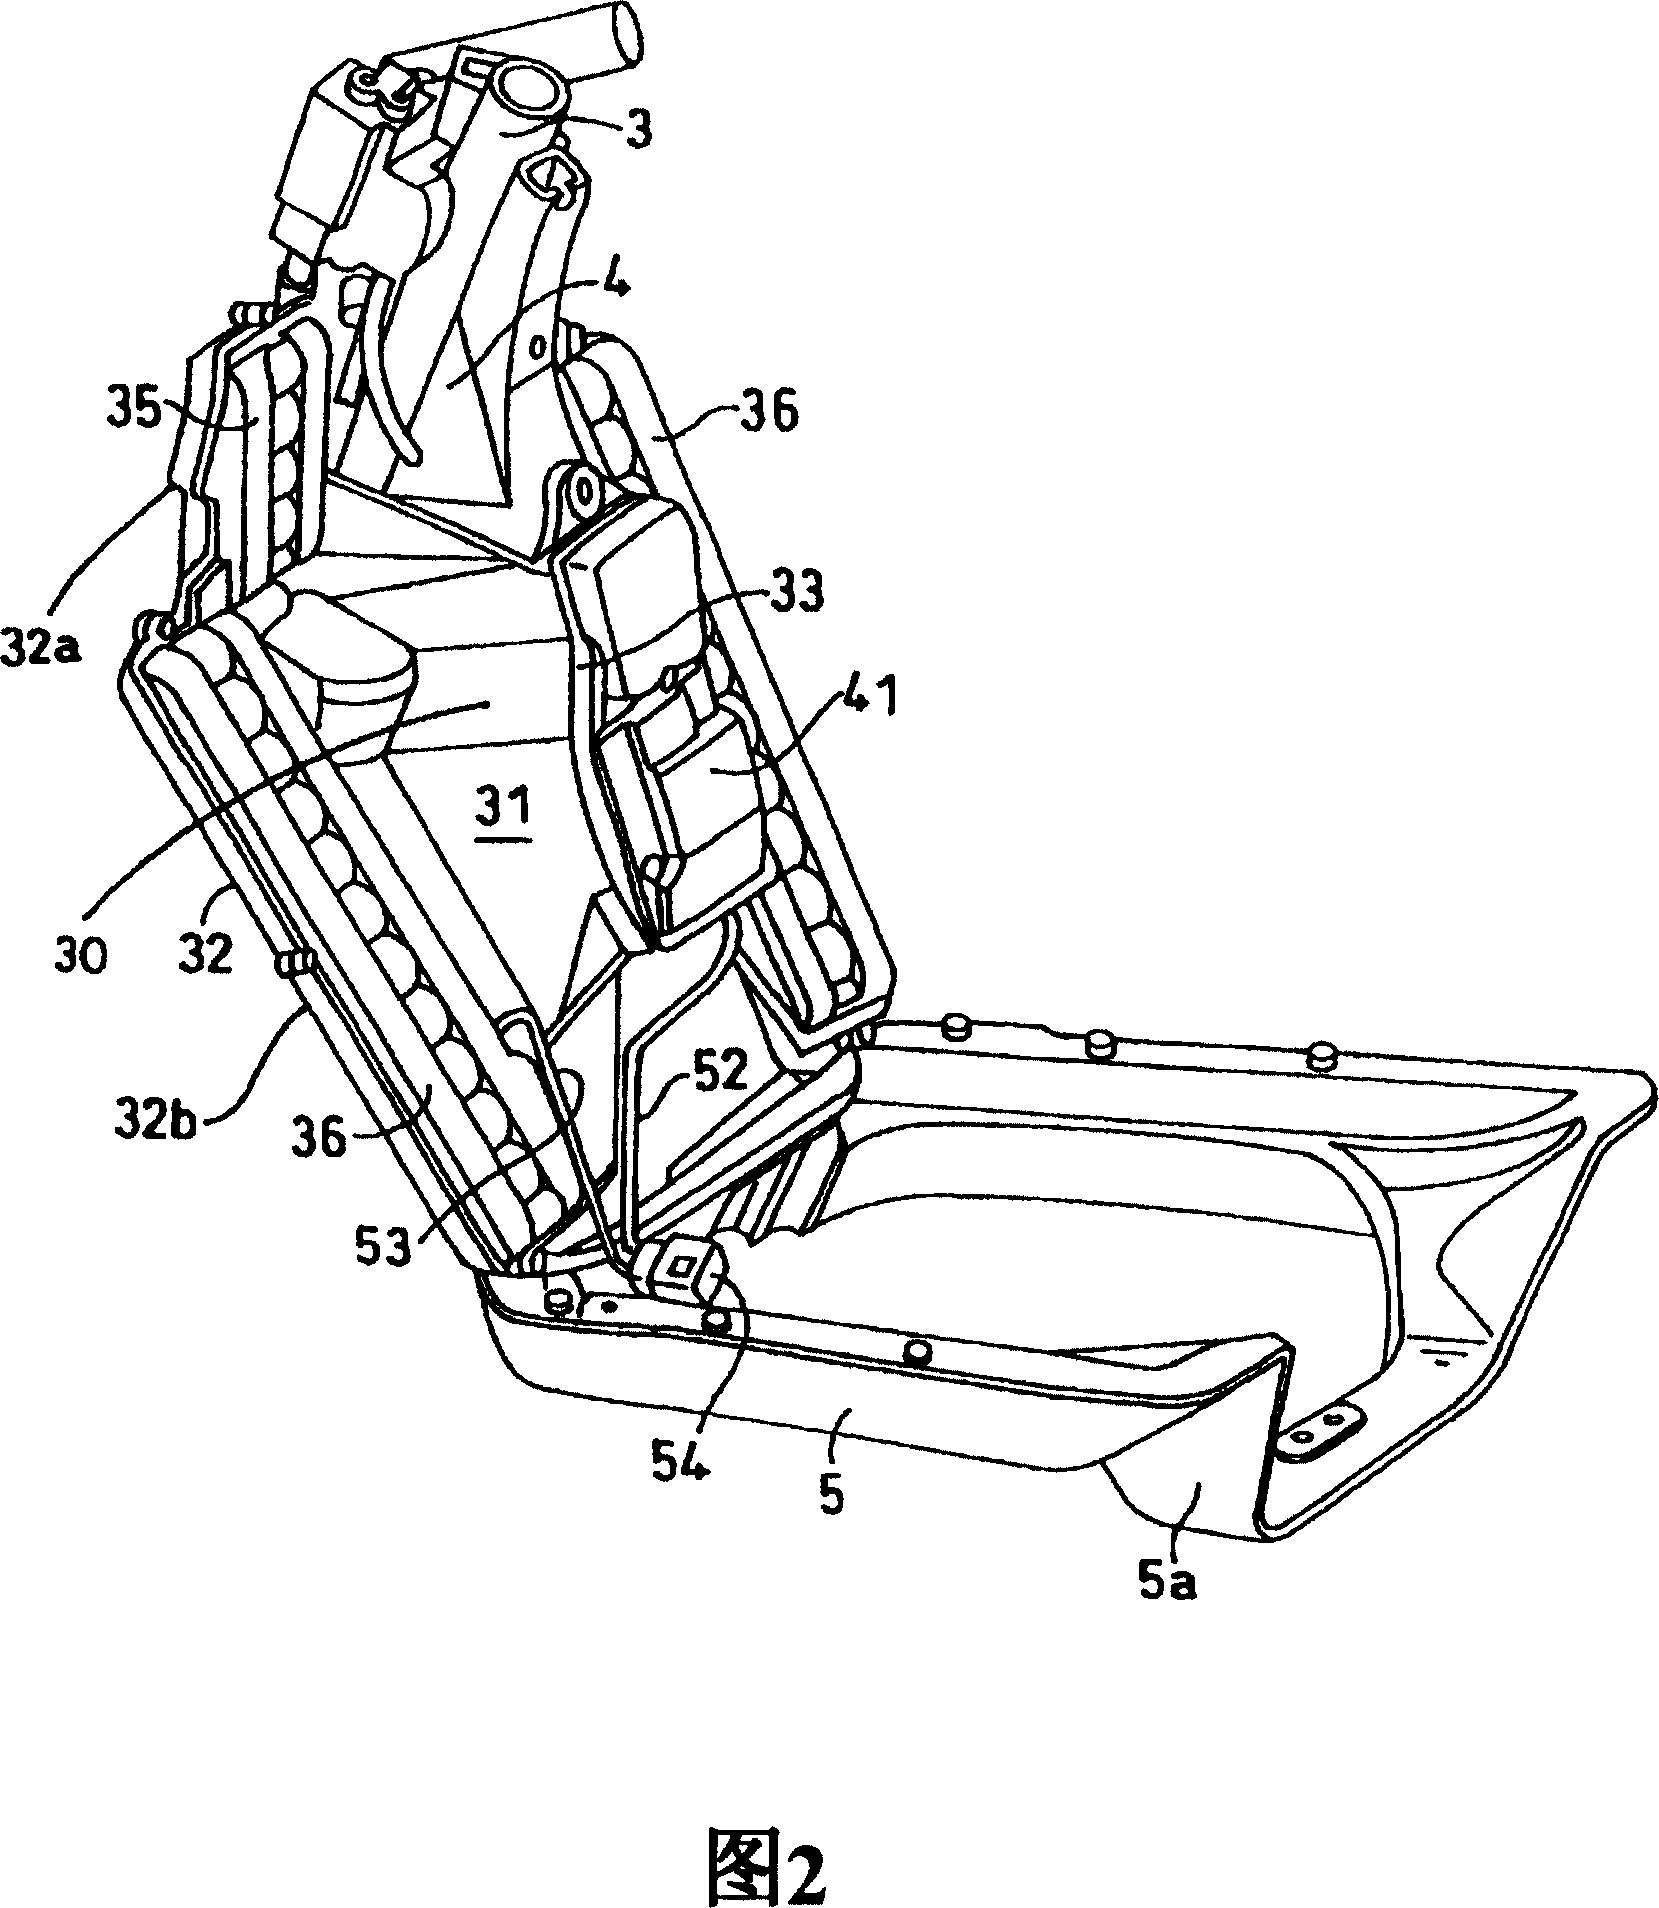 Battery holder of electric vehicle